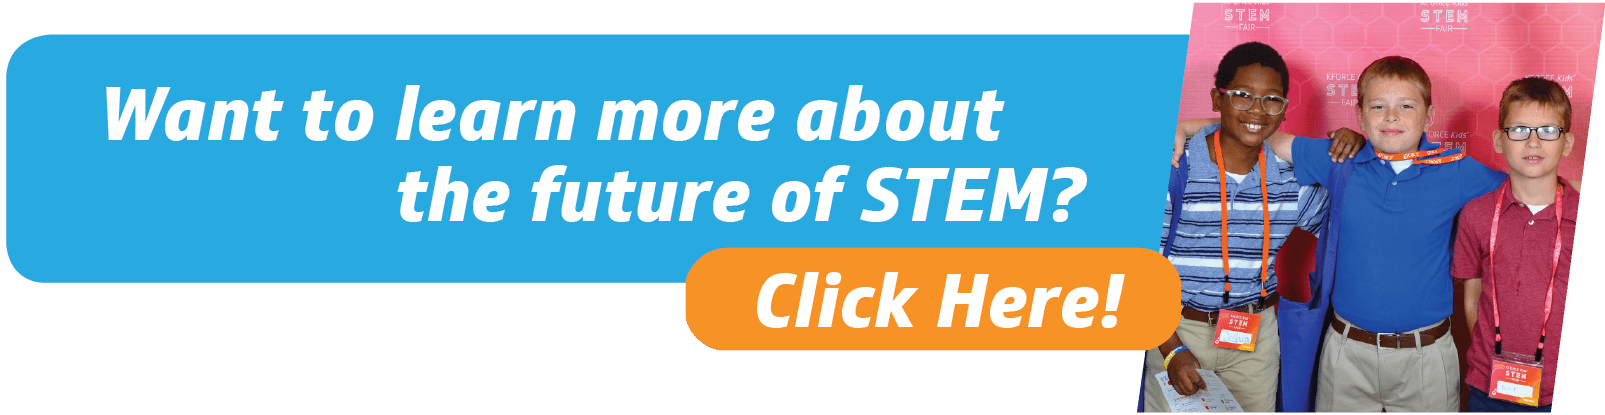 learn more about the future of stem